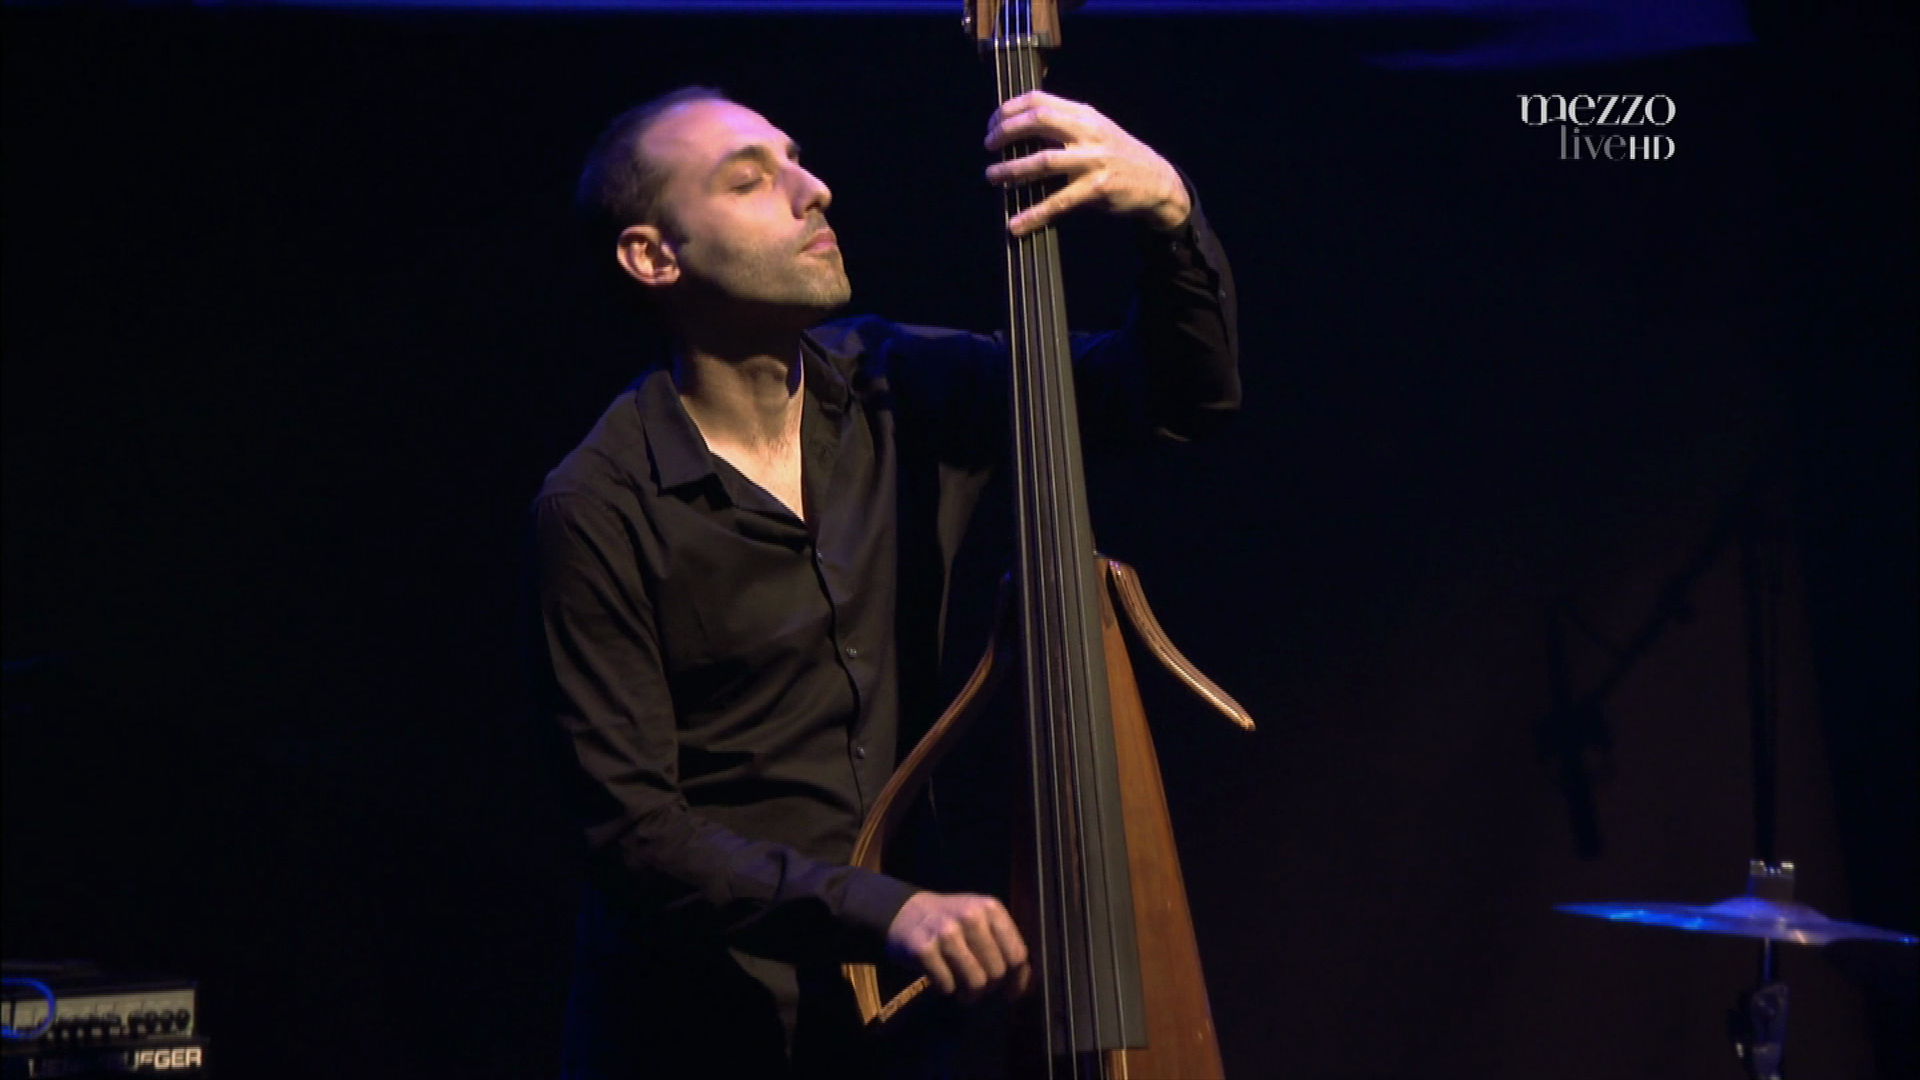 2011 Giovanni Mirabassi Trio - at Jazz sous les Pommiers [HDTV 1080i] 0